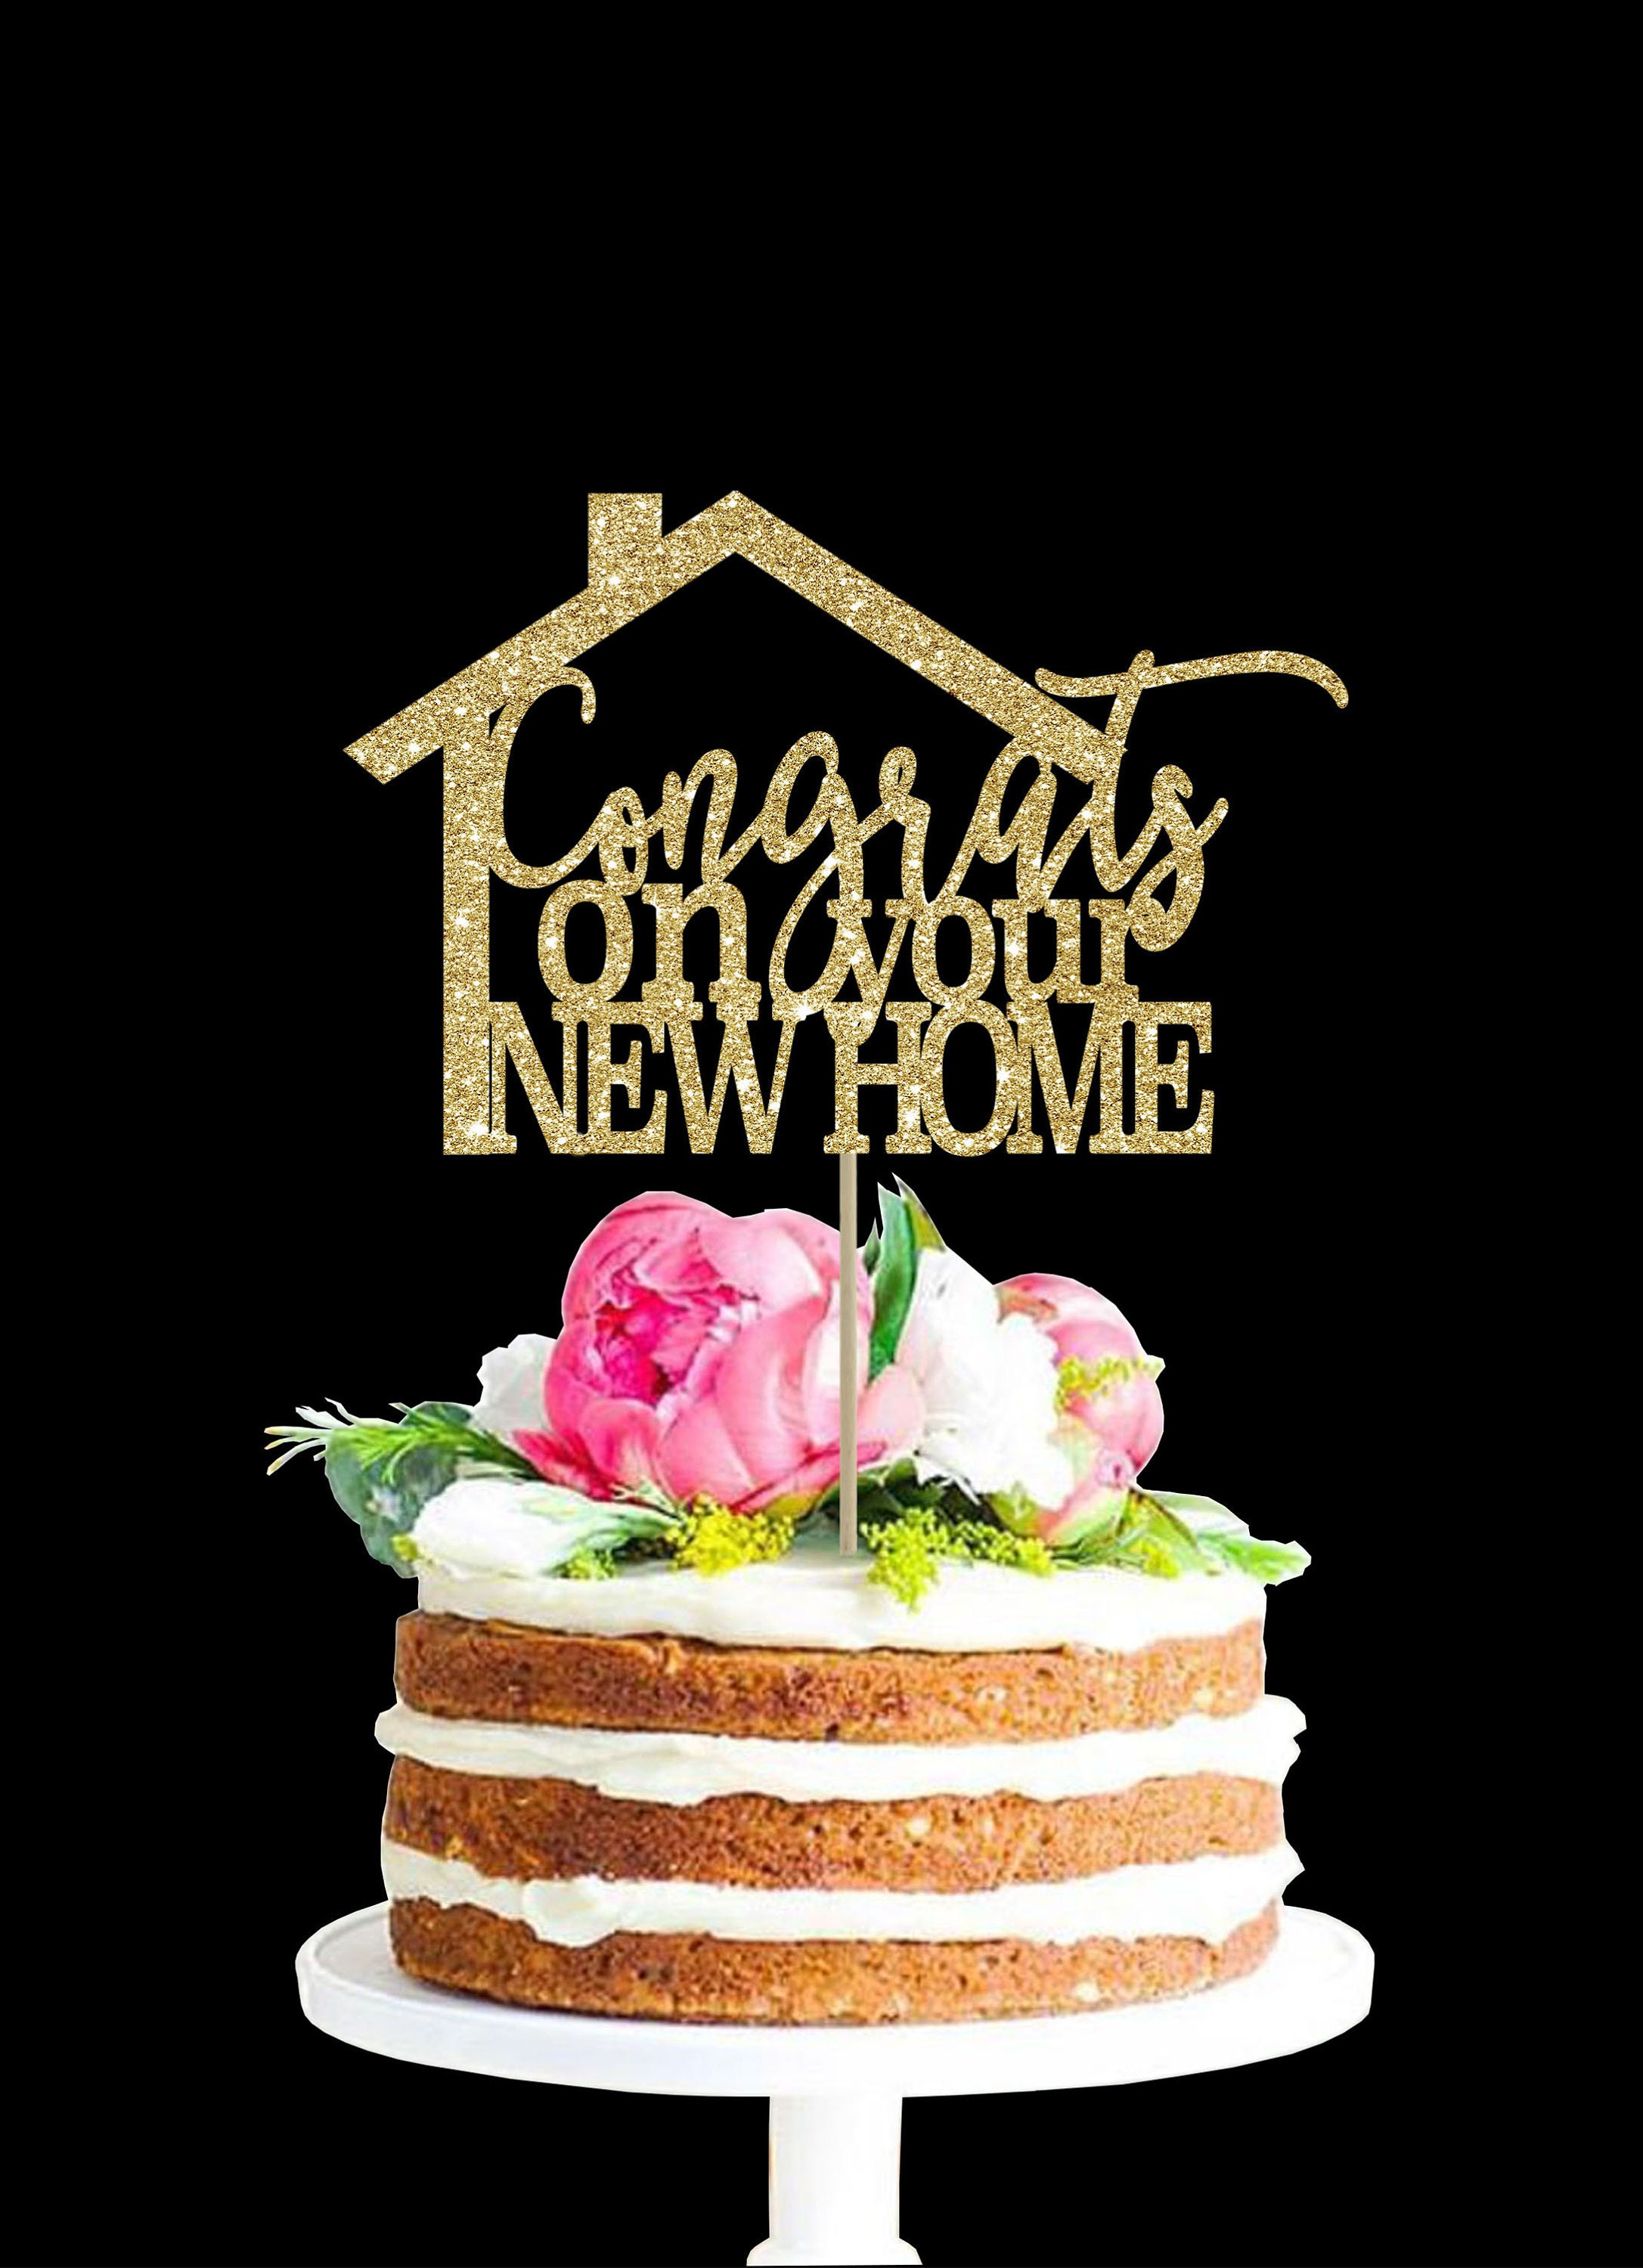 Congrats on New Home New Home Cake Topper House Warming - Etsy